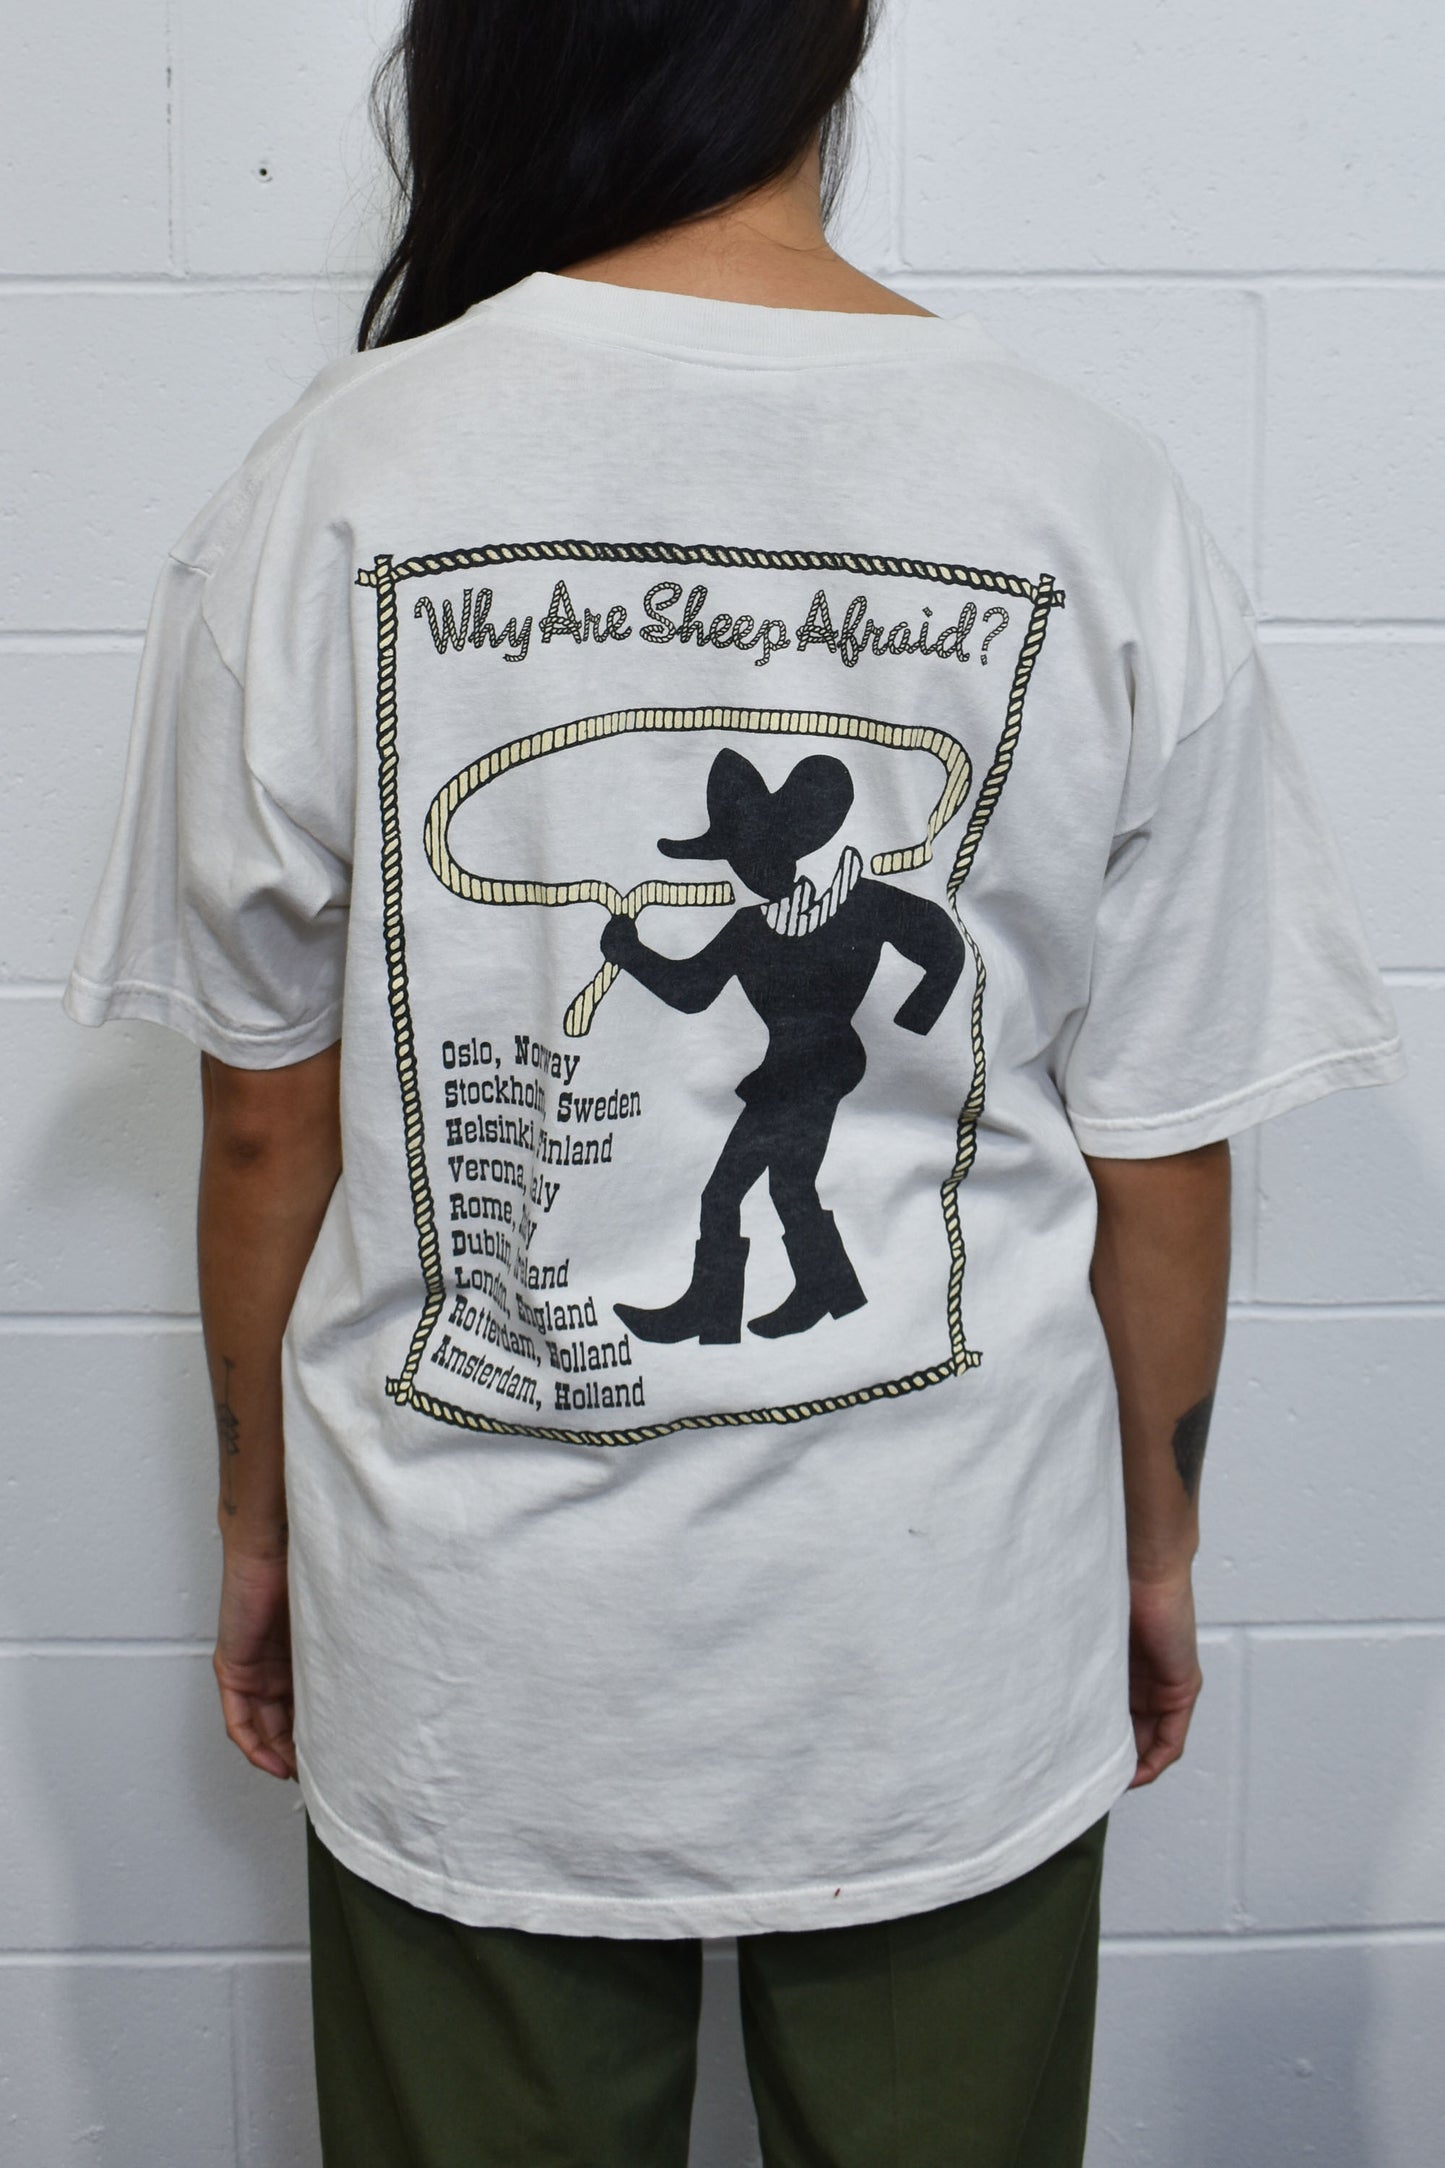 Vintage 90s Pearl Jam "Why Are Sheep Afraid?" Tour T-shirt